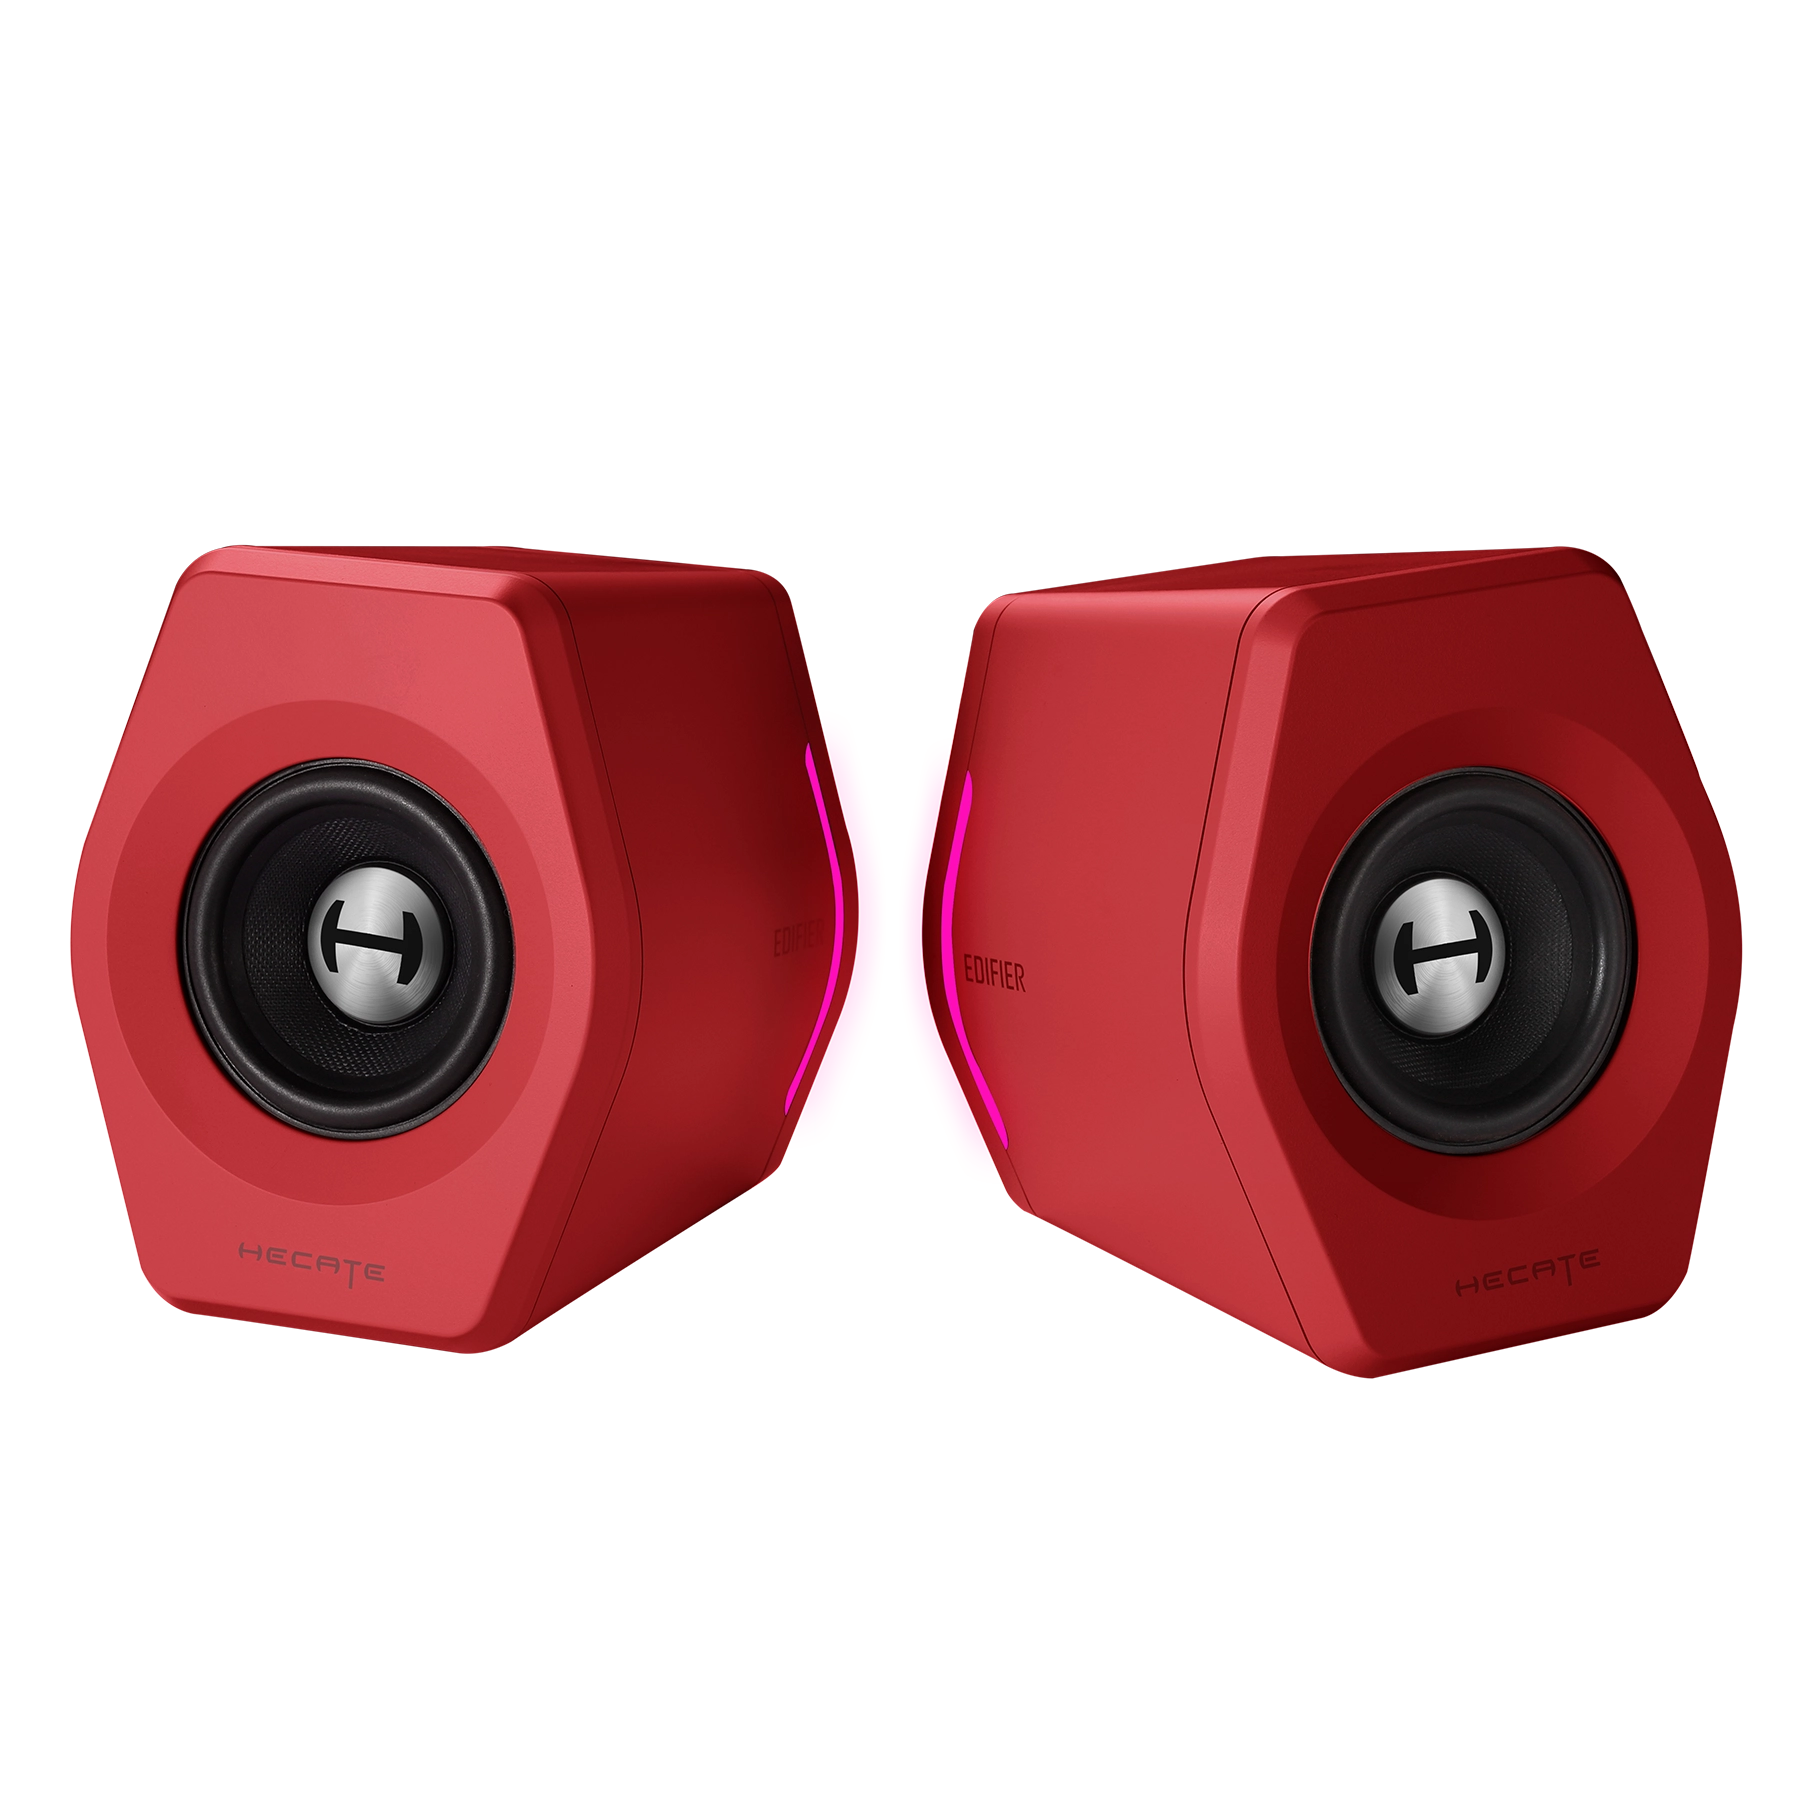 G2000 Speaker Product Picture red_